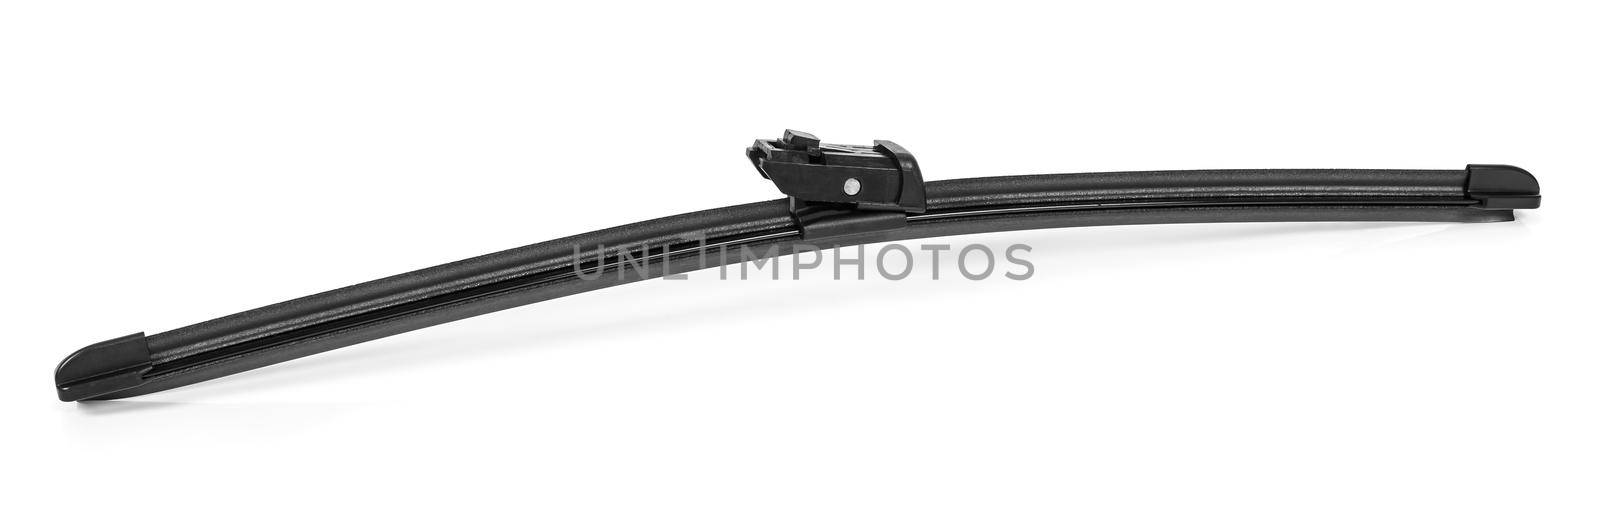 Modern car wiper on white background by mkos83